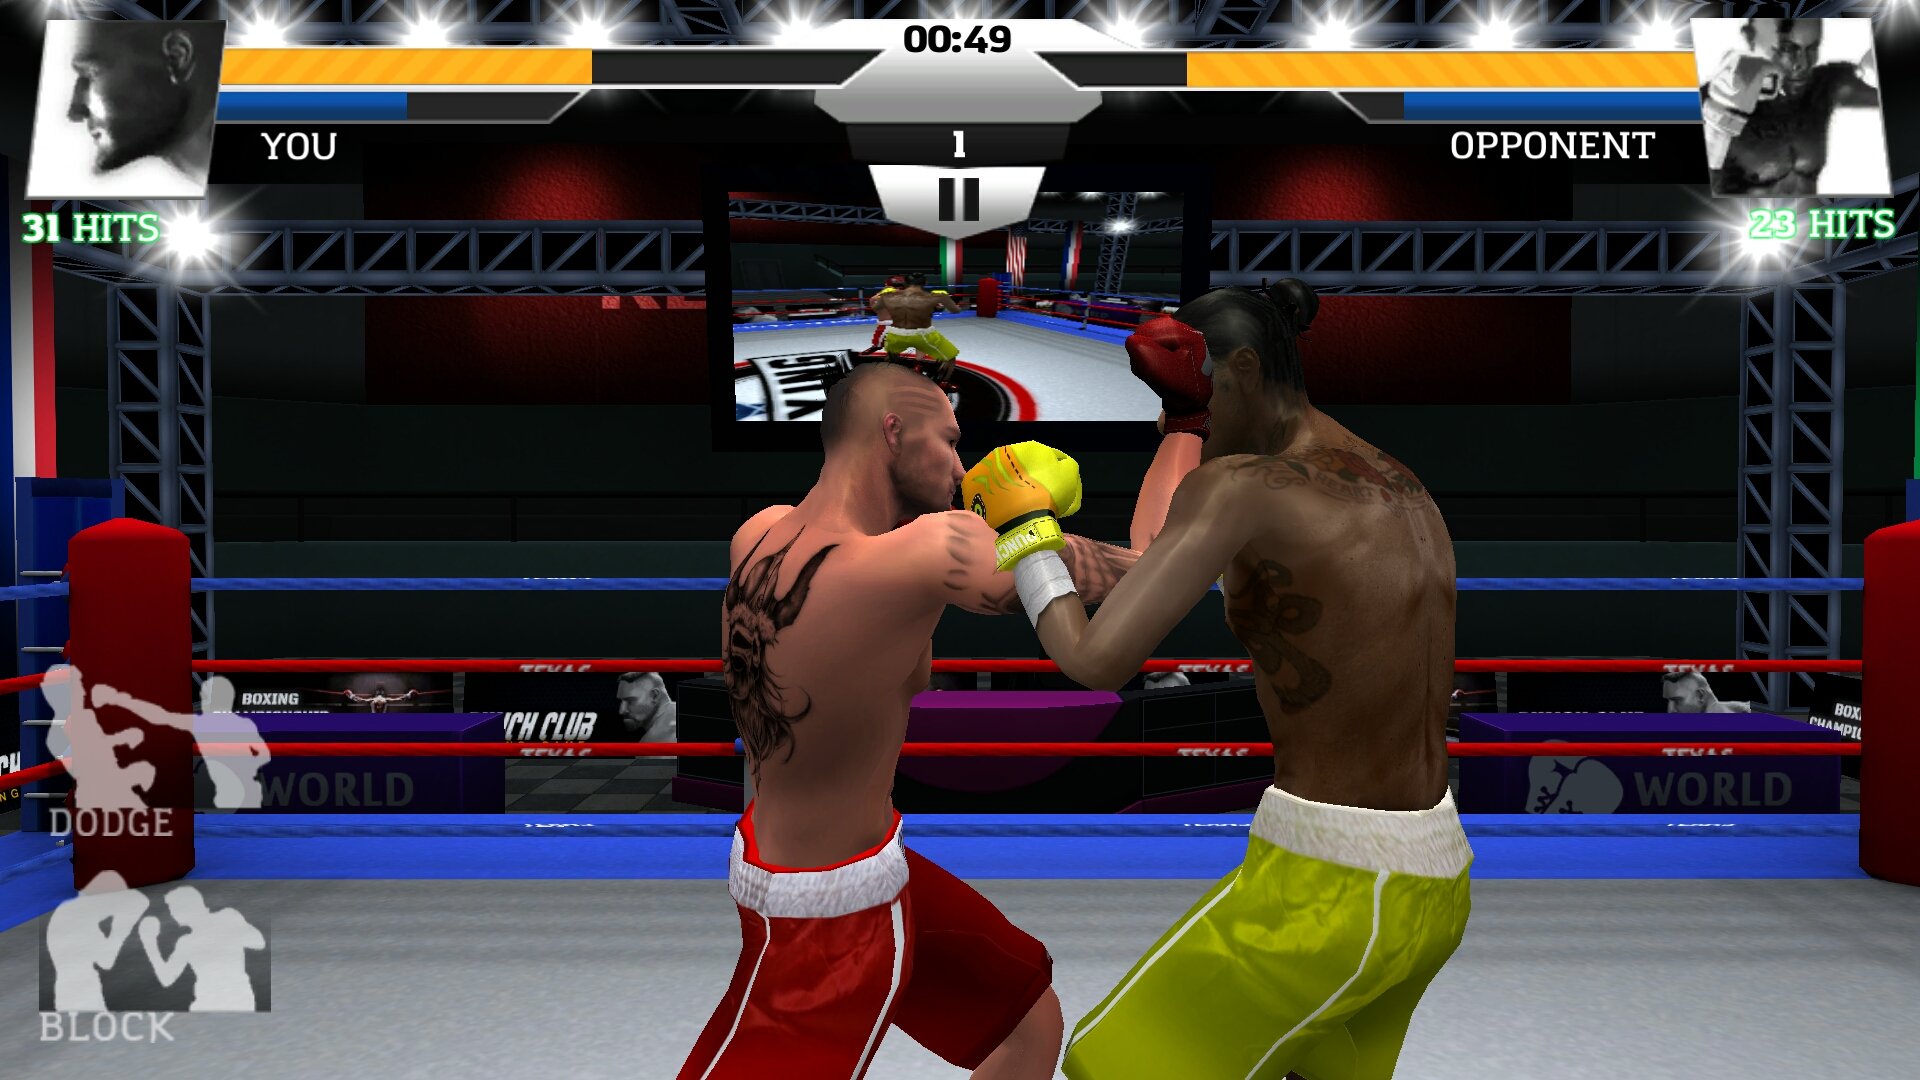 Untitled boxing game hawk